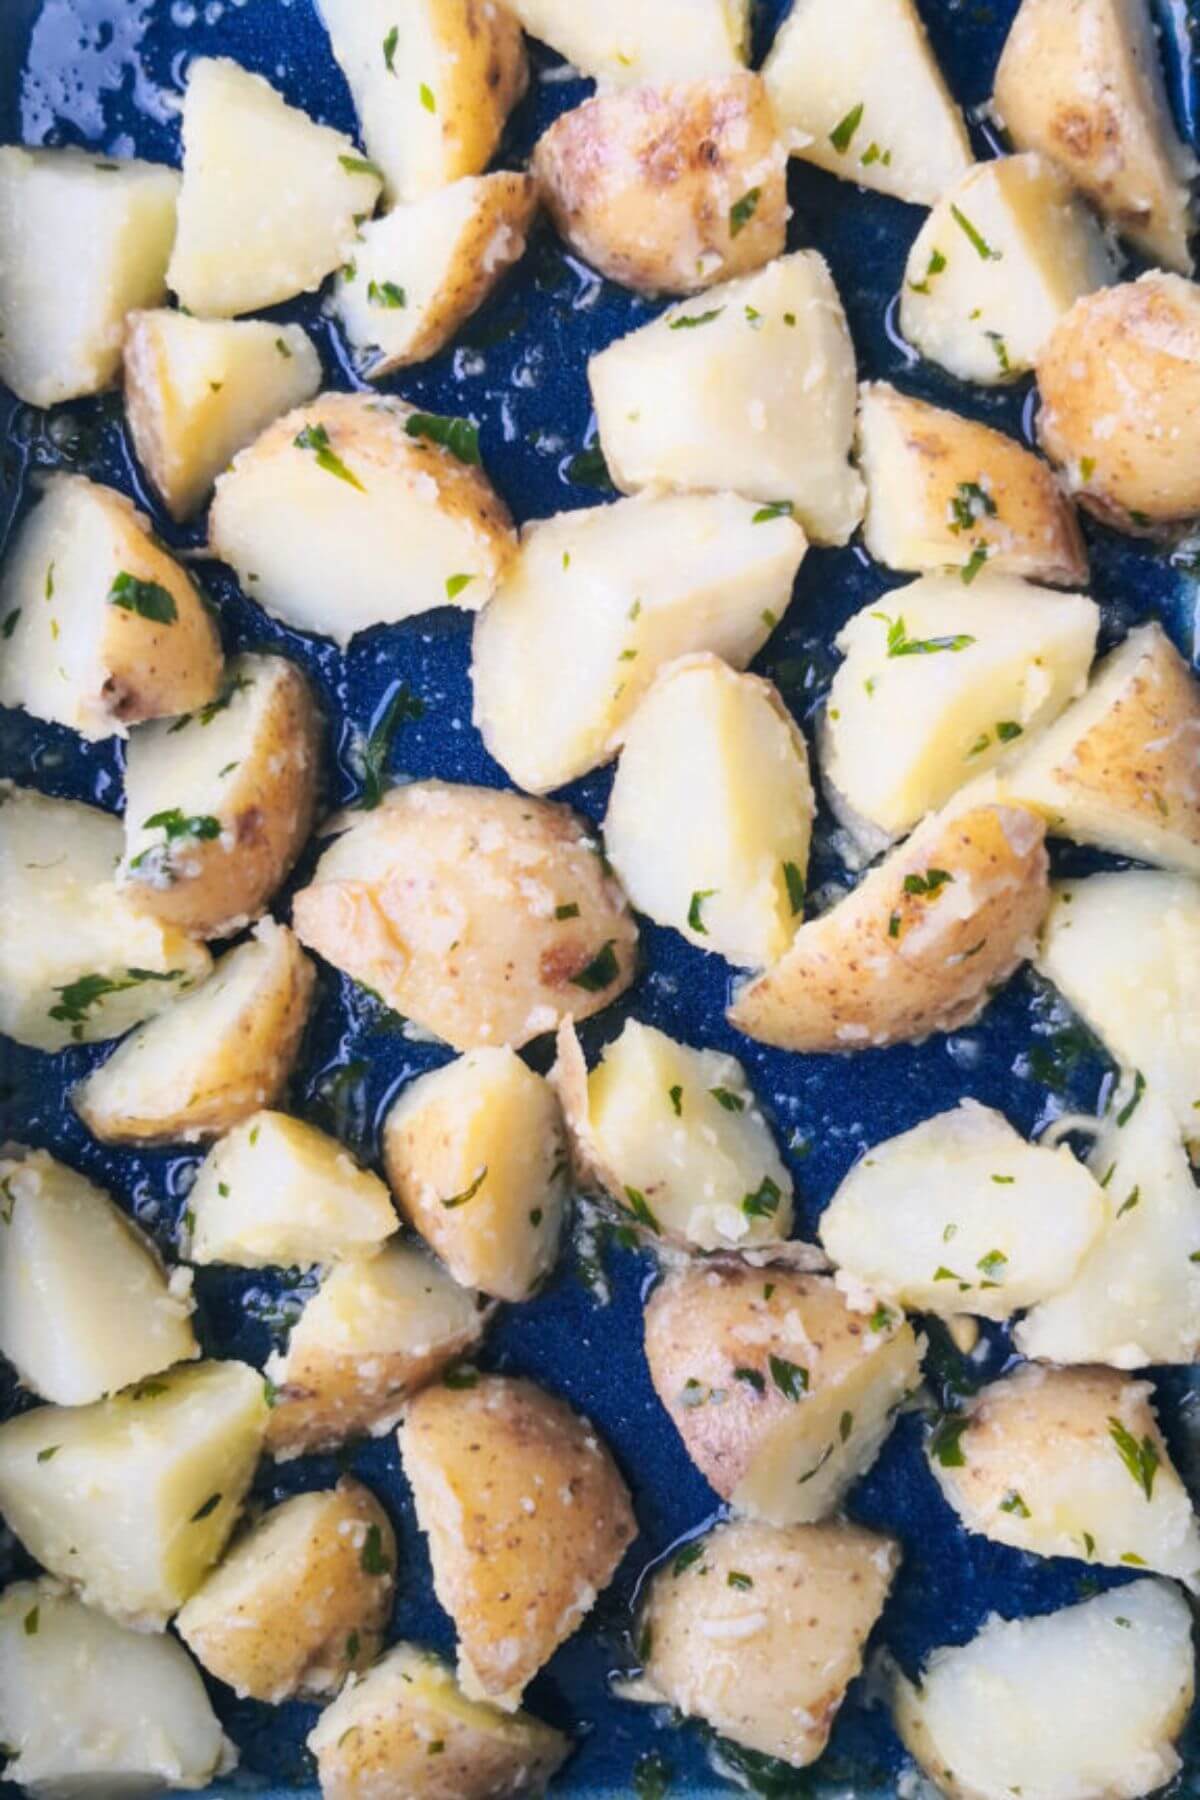 Garlic butter potatoes in a large blue oven dish ready to be roasted.